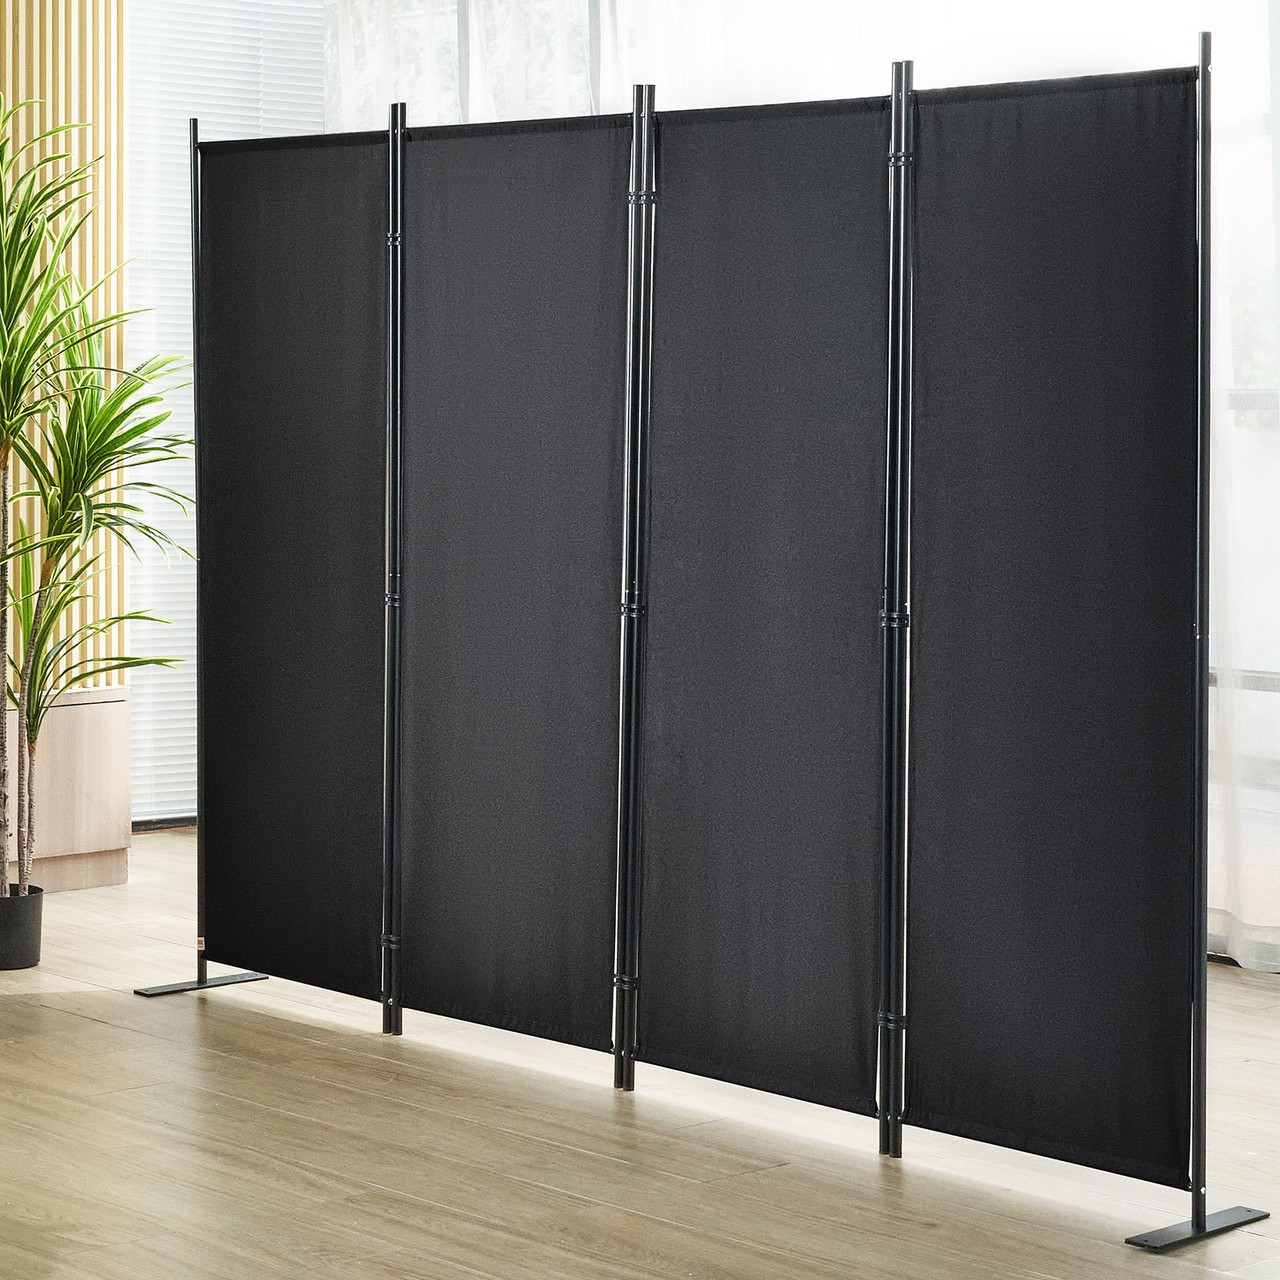 VEVOR Room Divider, 5.6 ft ?88x67.5inch?Room Dividers and Folding Privacy Screens (4-panel), Fabric Partition Room Dividers for Office, Bedroom, Dining Room, Study, Freestanding, Black